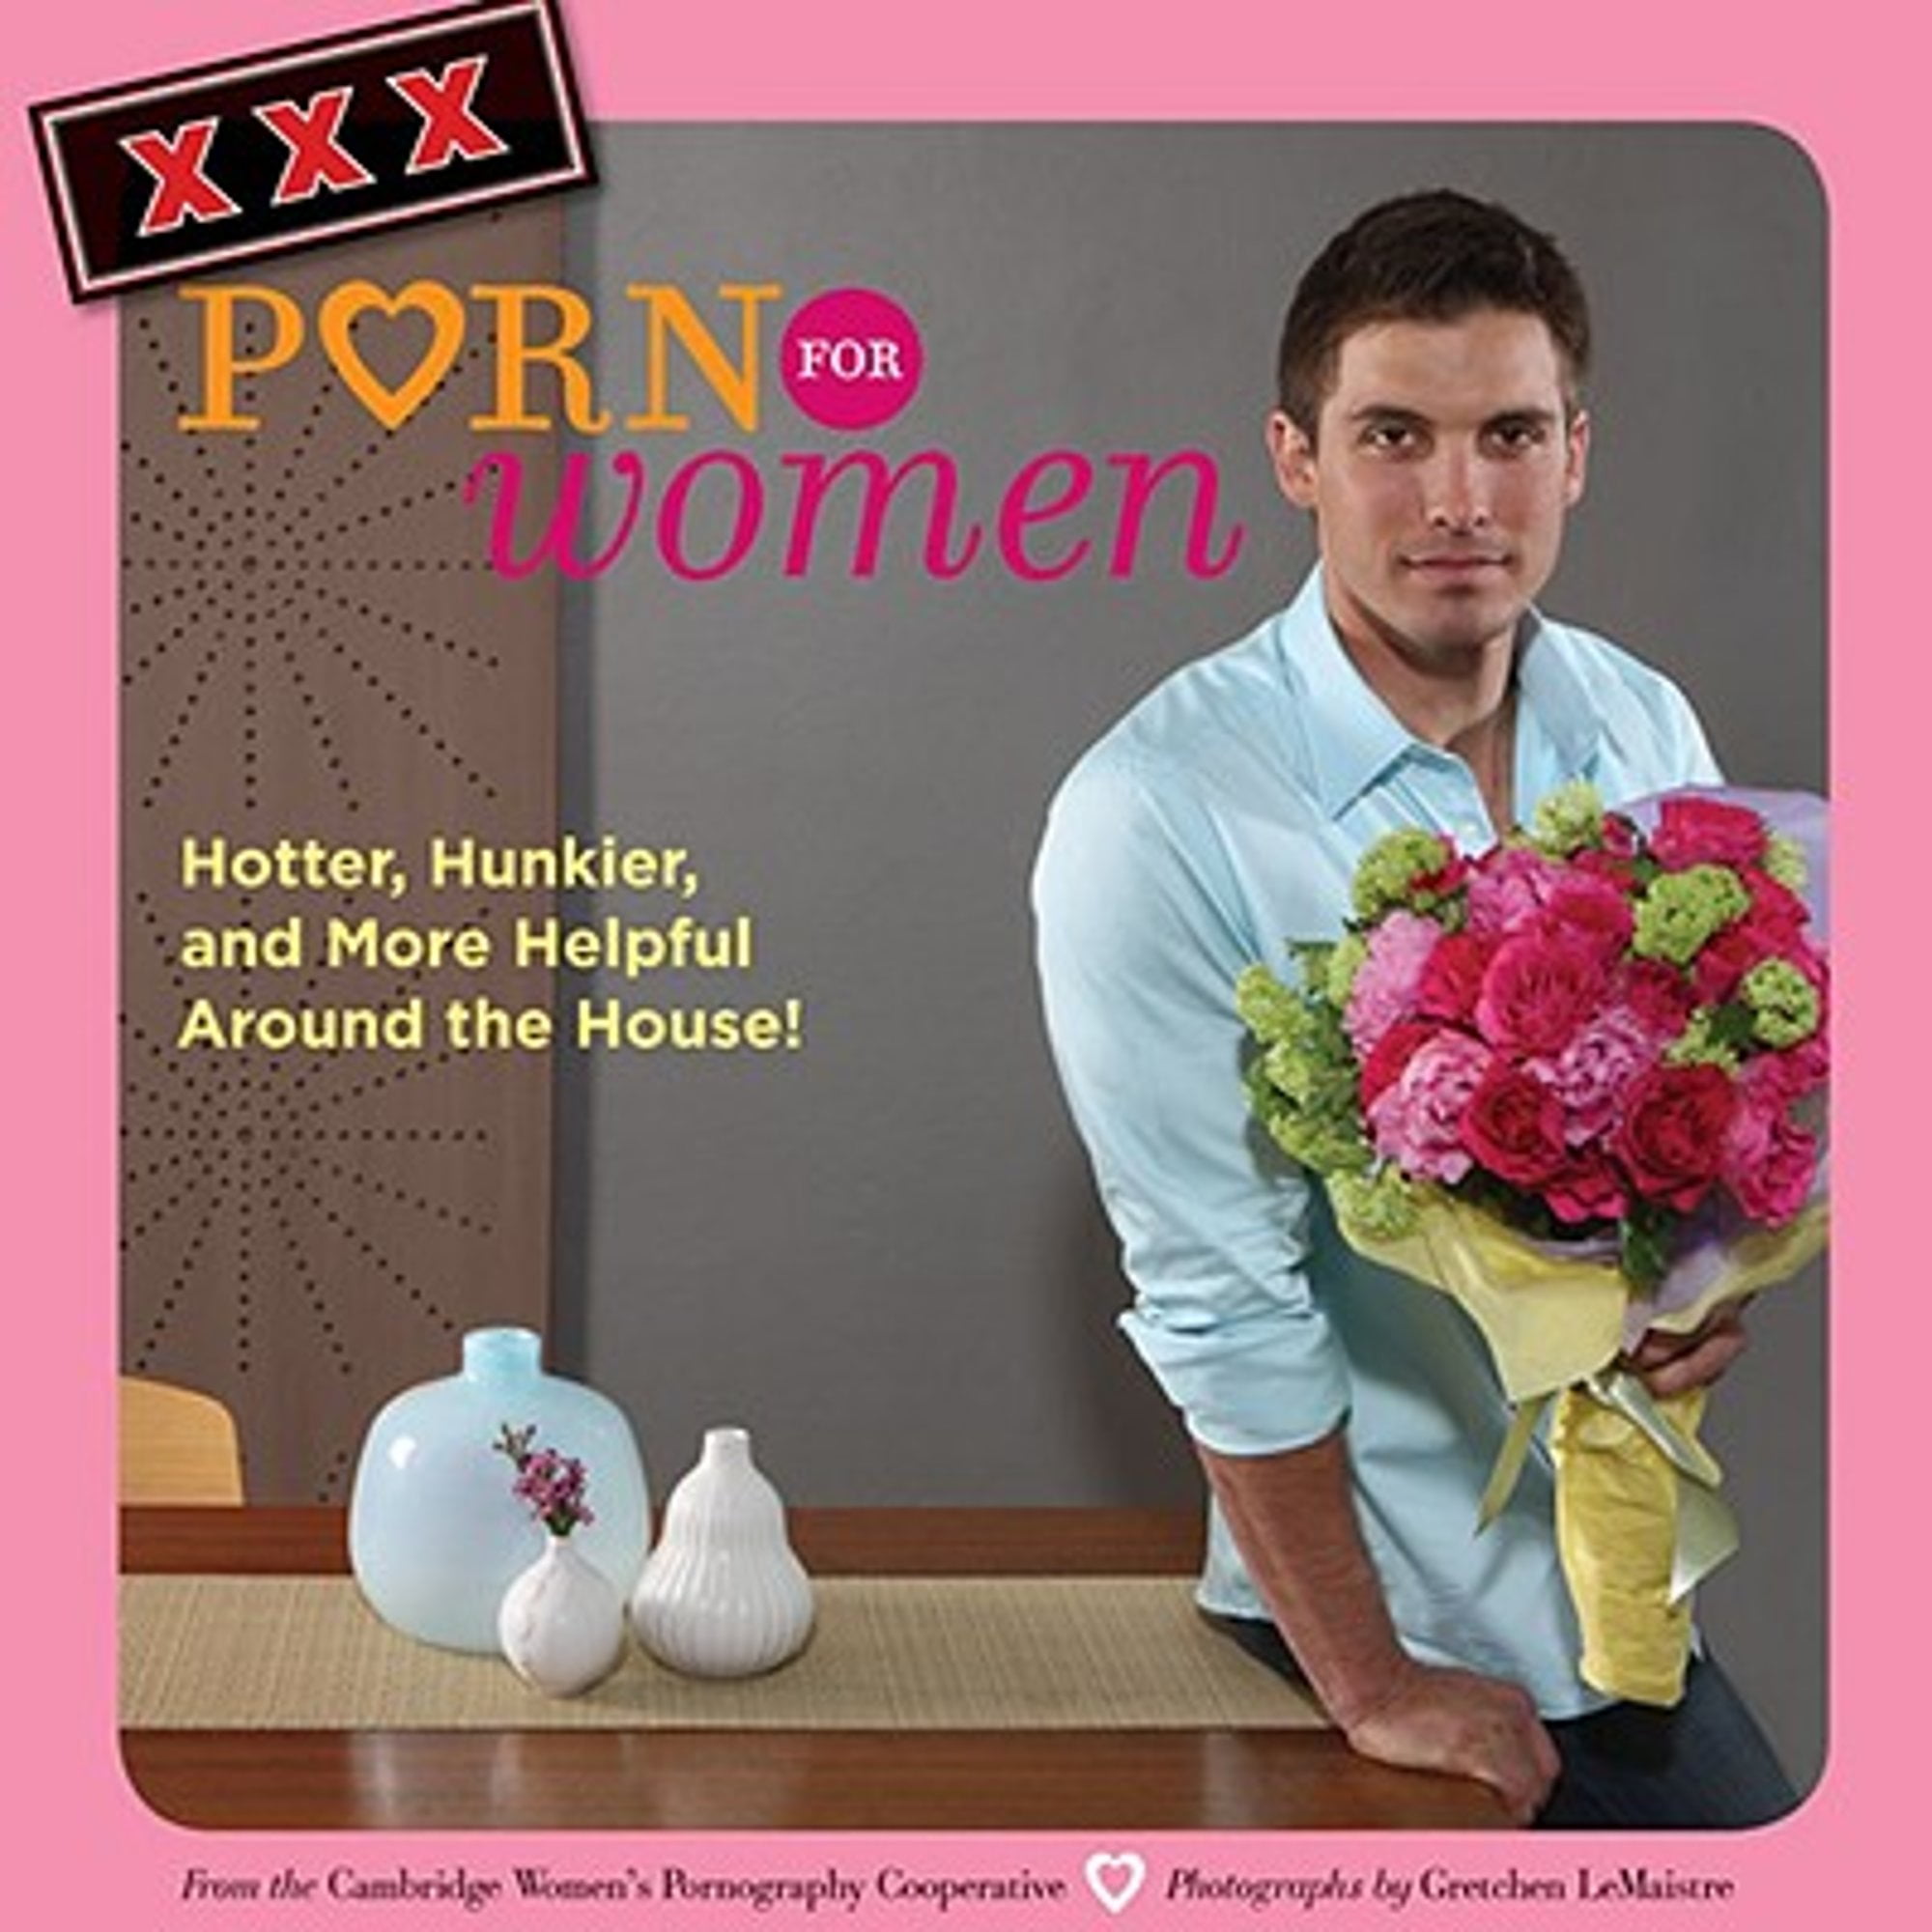 Xxx Six Months - XXX Porn for Women : Hotter, Hunkier, and More Helpful Around the House!  (Paperback) - Walmart.com